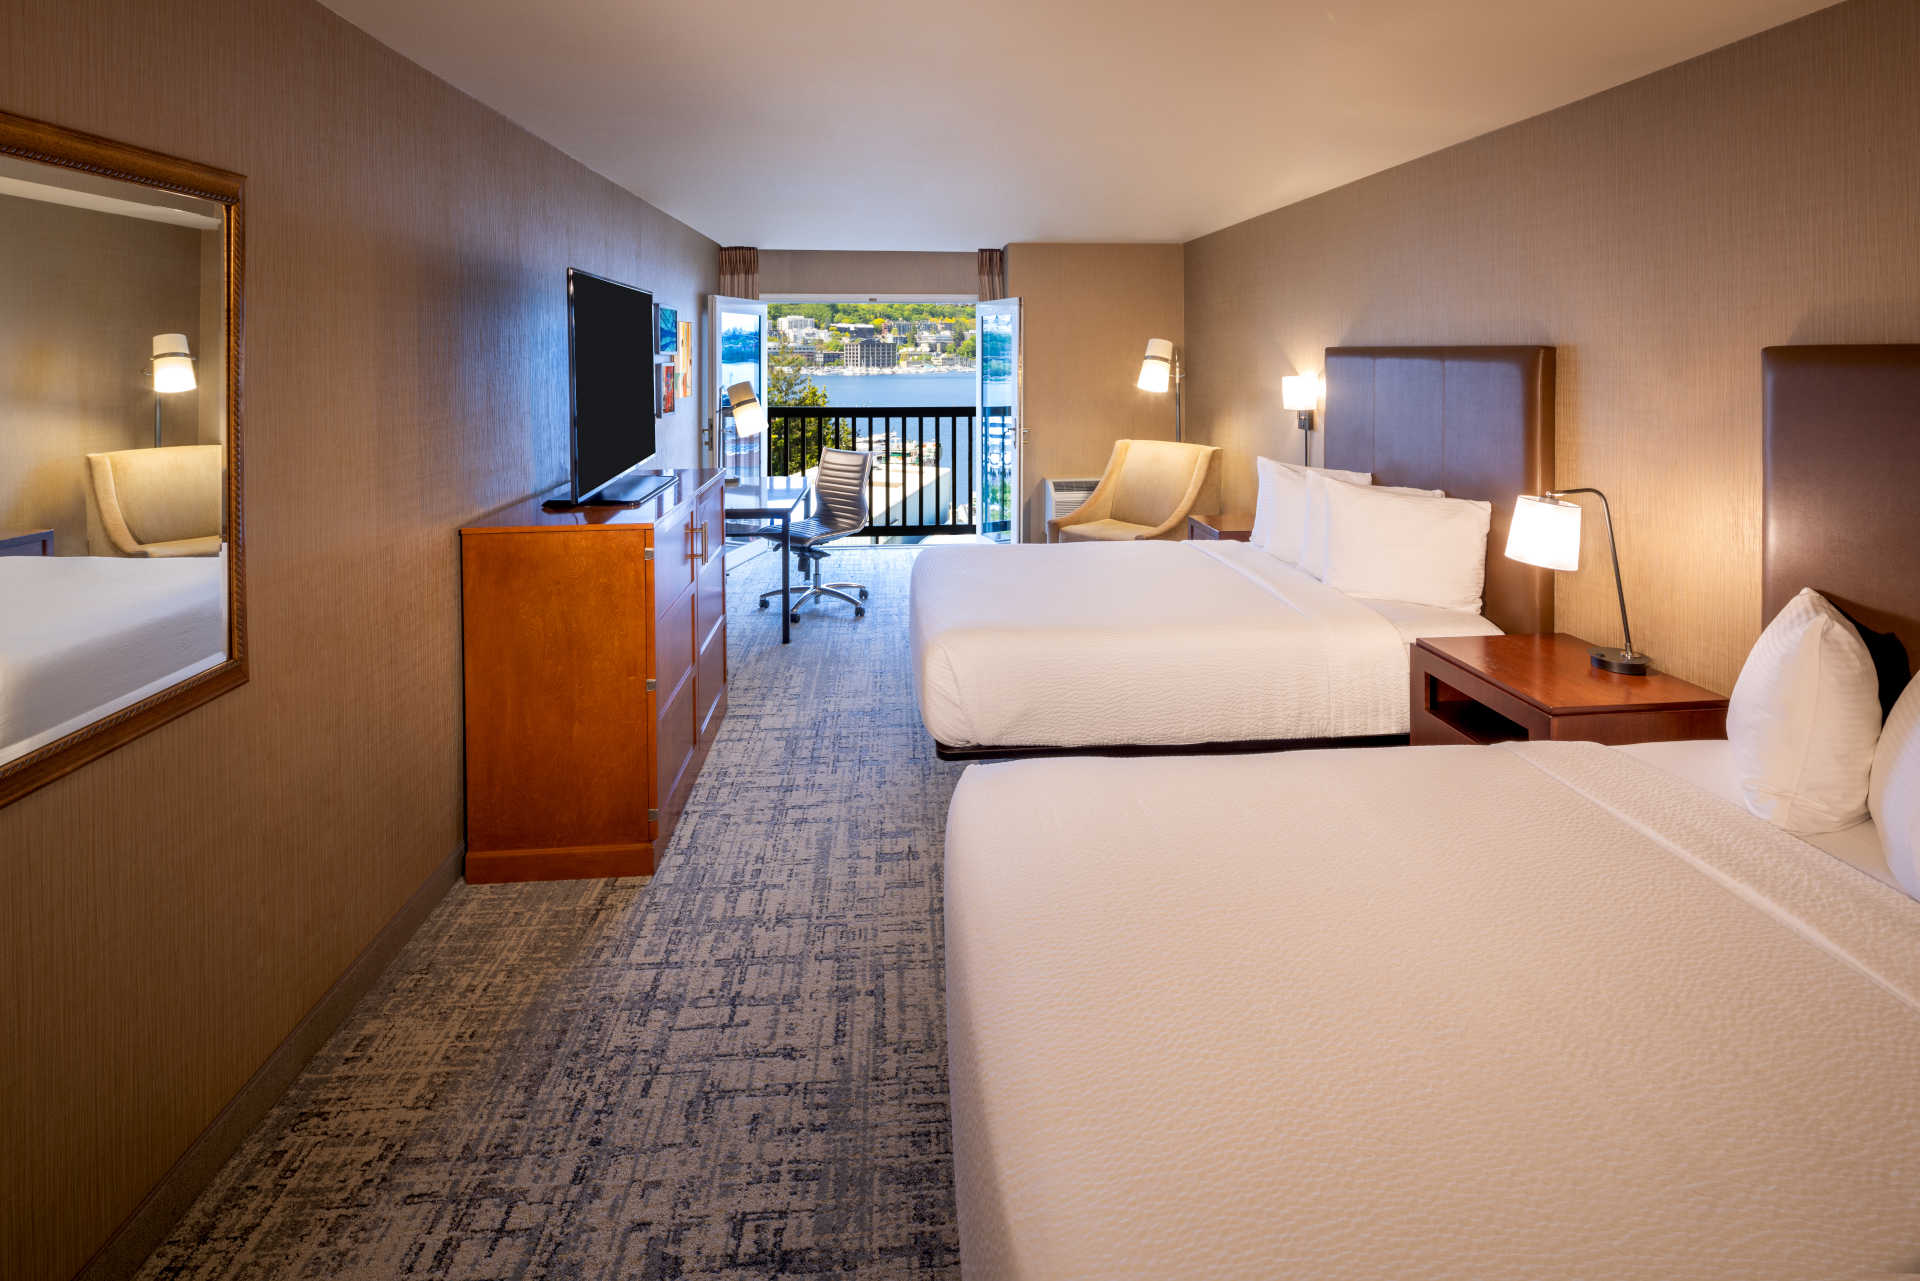 Double Queen guest room with lake view at Silver Cloud Hotel Seattle - Lake Union